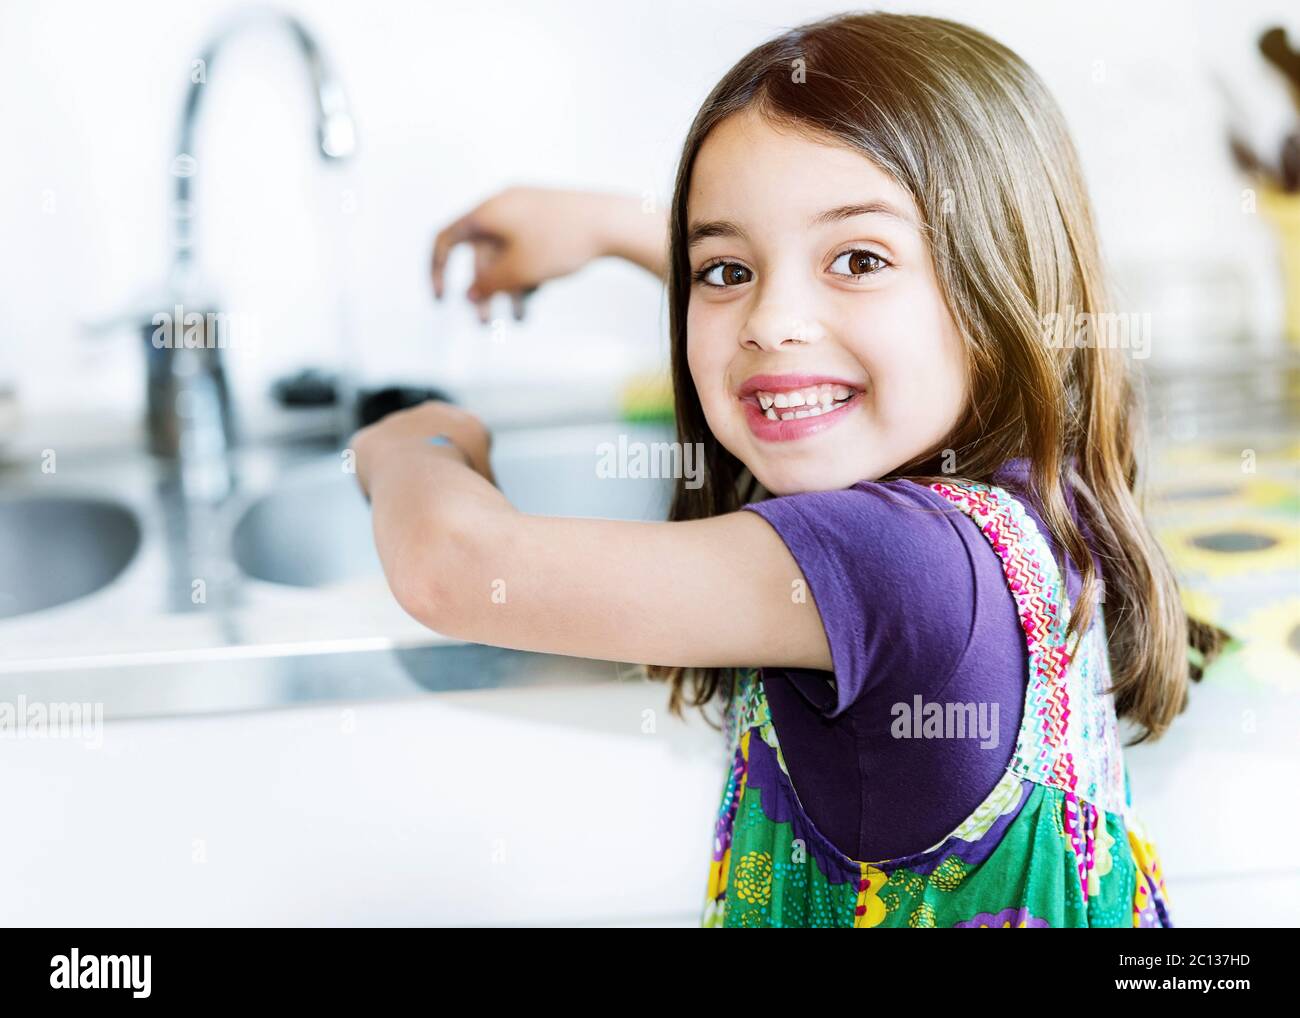 kid washing hands in the kitchen Stock Photo